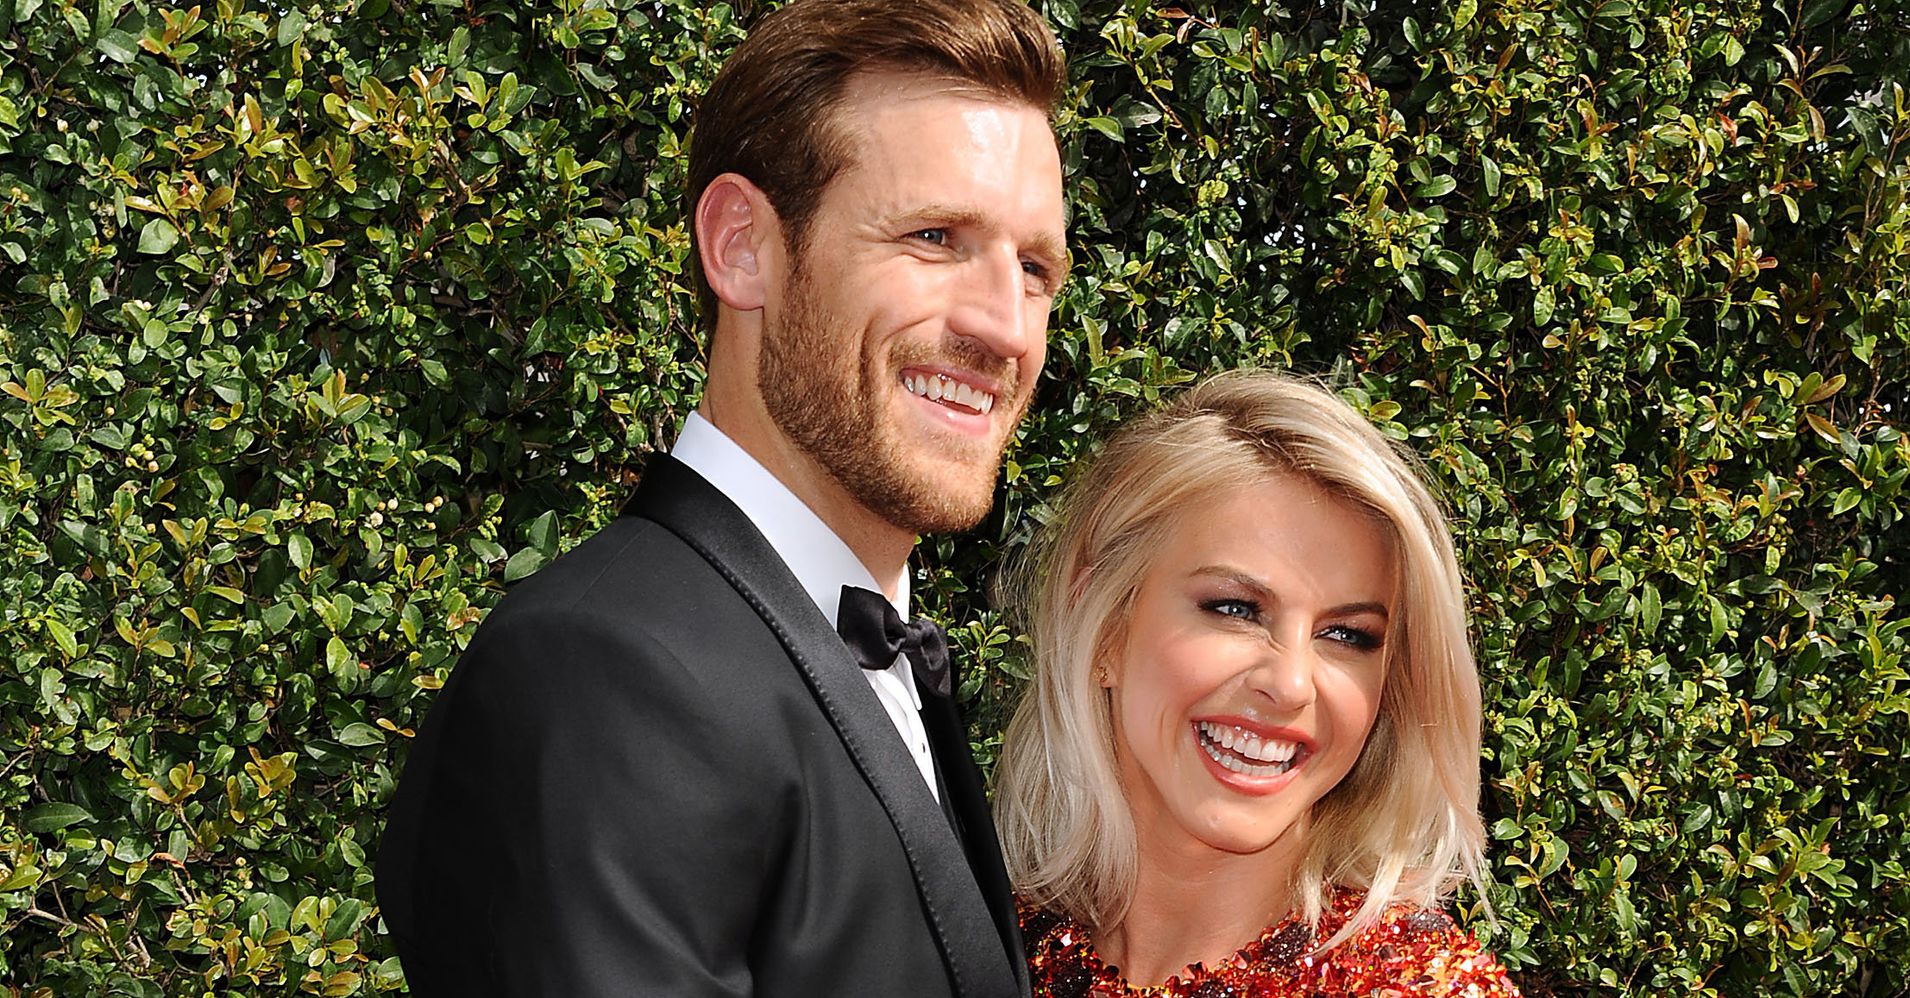 Julianne Hough And Brooks Laich Get Married In Idaho Ceremony | HuffPost1910 x 998